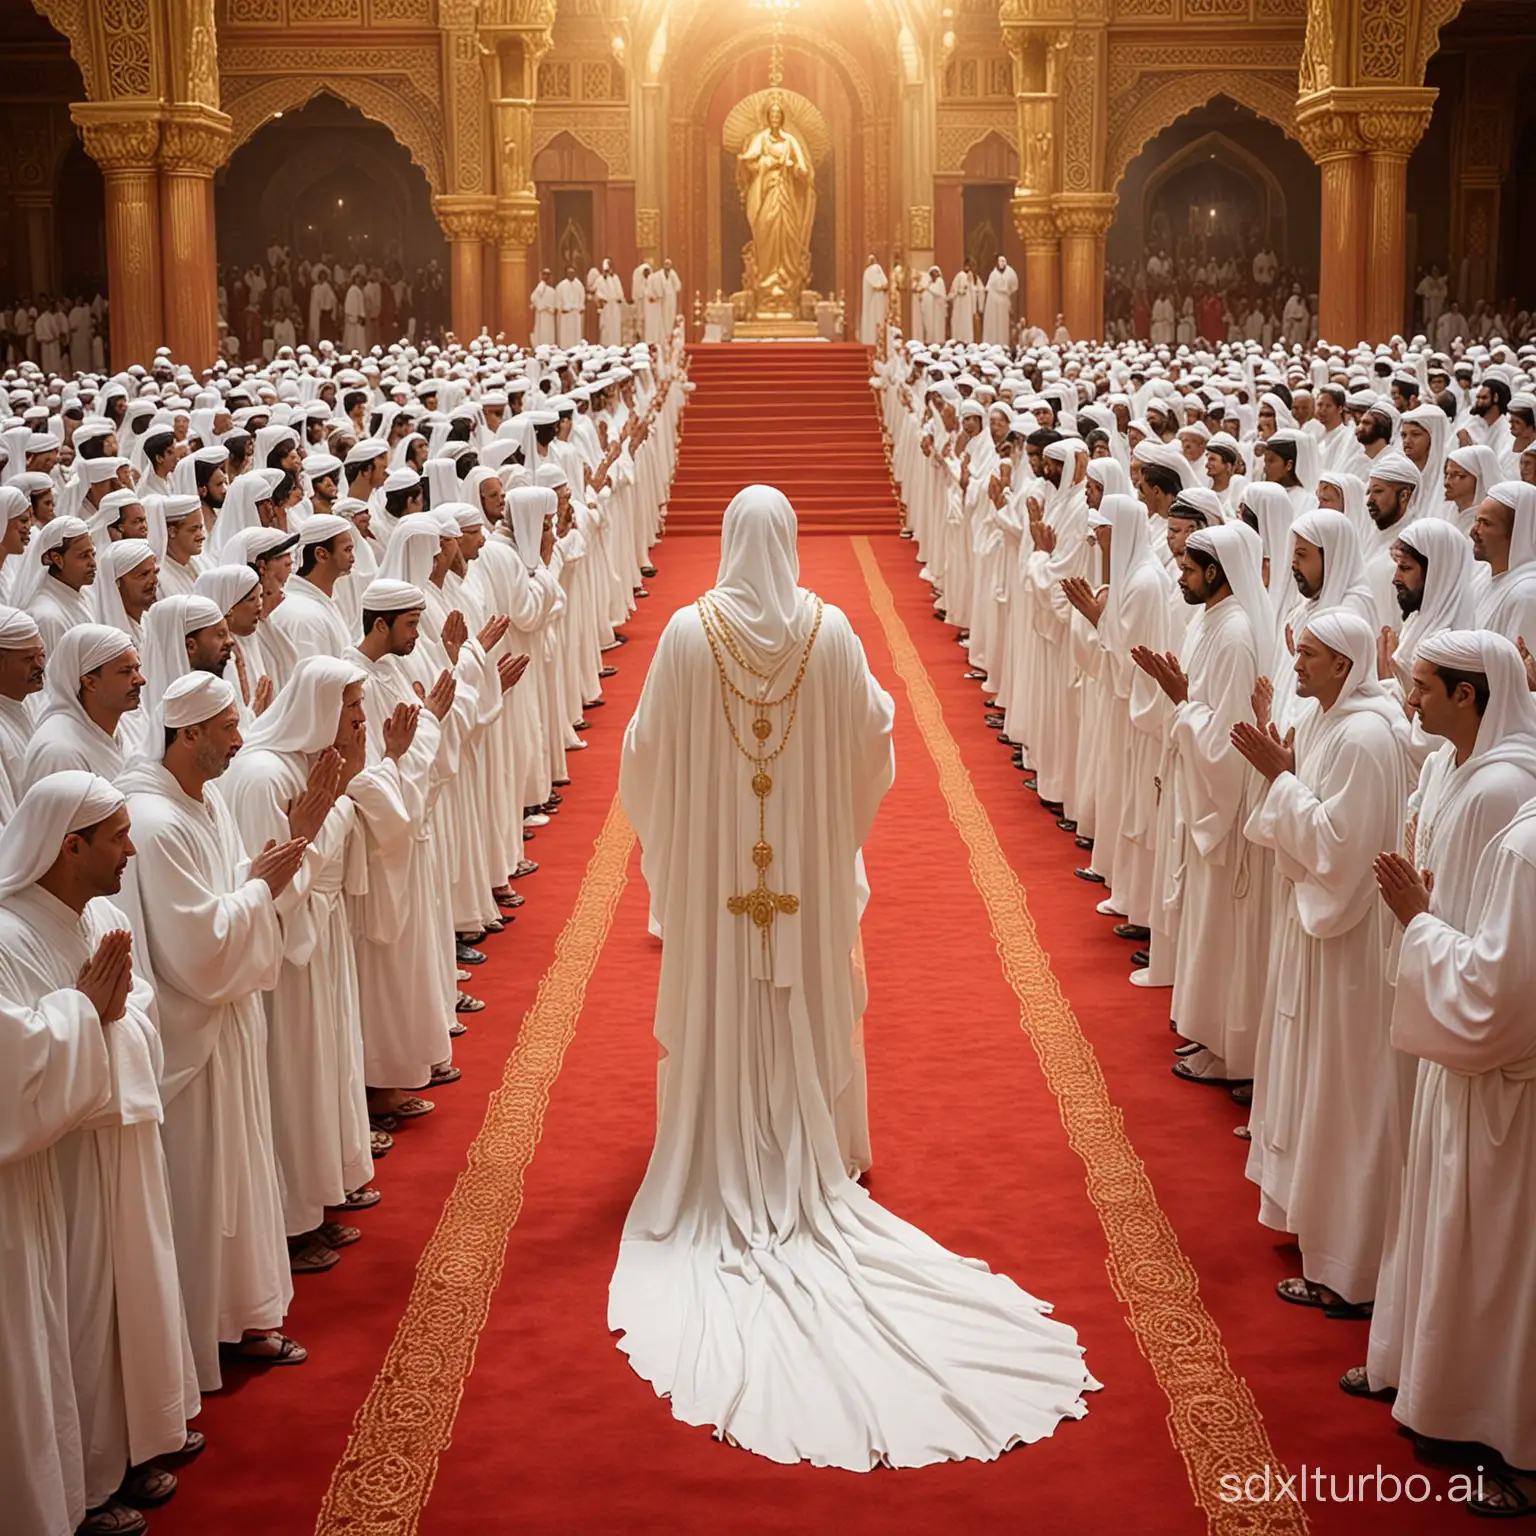 A tall, angelic figure in white robes and veil, exuding peace and power, guides people along an endless red carpet towards the light of God. Spectators in white clothing watch in awe, praying for the figure’s success as they hover effortlessly over the carpet, creating a righteous and respectful atmosphere with a touch of warrior-like masculinity.